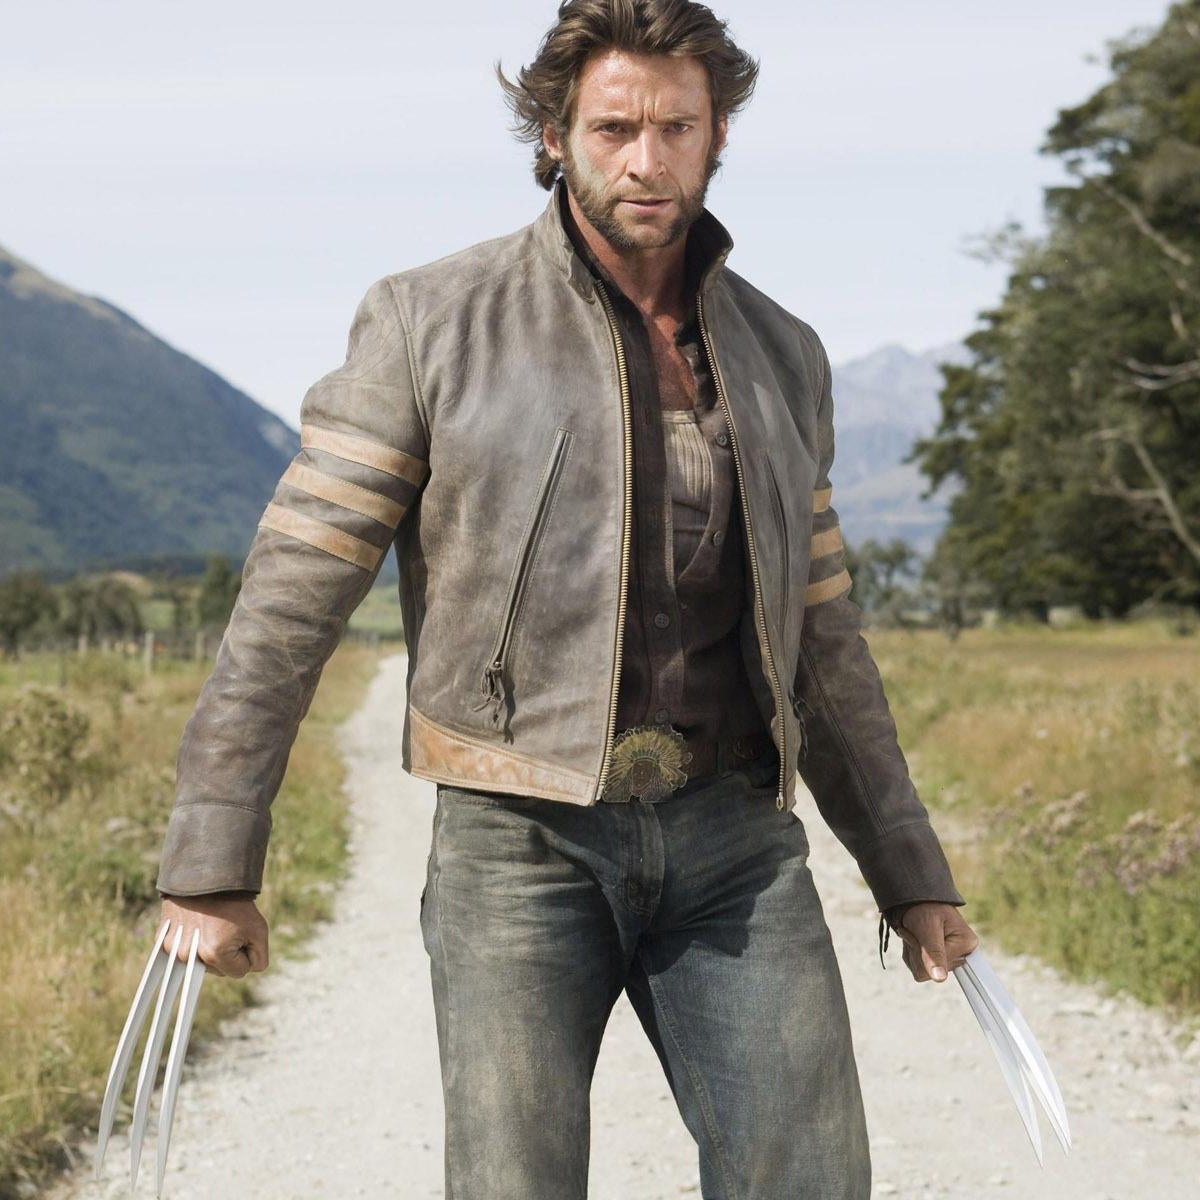 Hugh Jackman won't join the Marvel Cinematic Universe as Wolverine in  future X-Men films after Disney-Fox deal | The Independent | The Independent